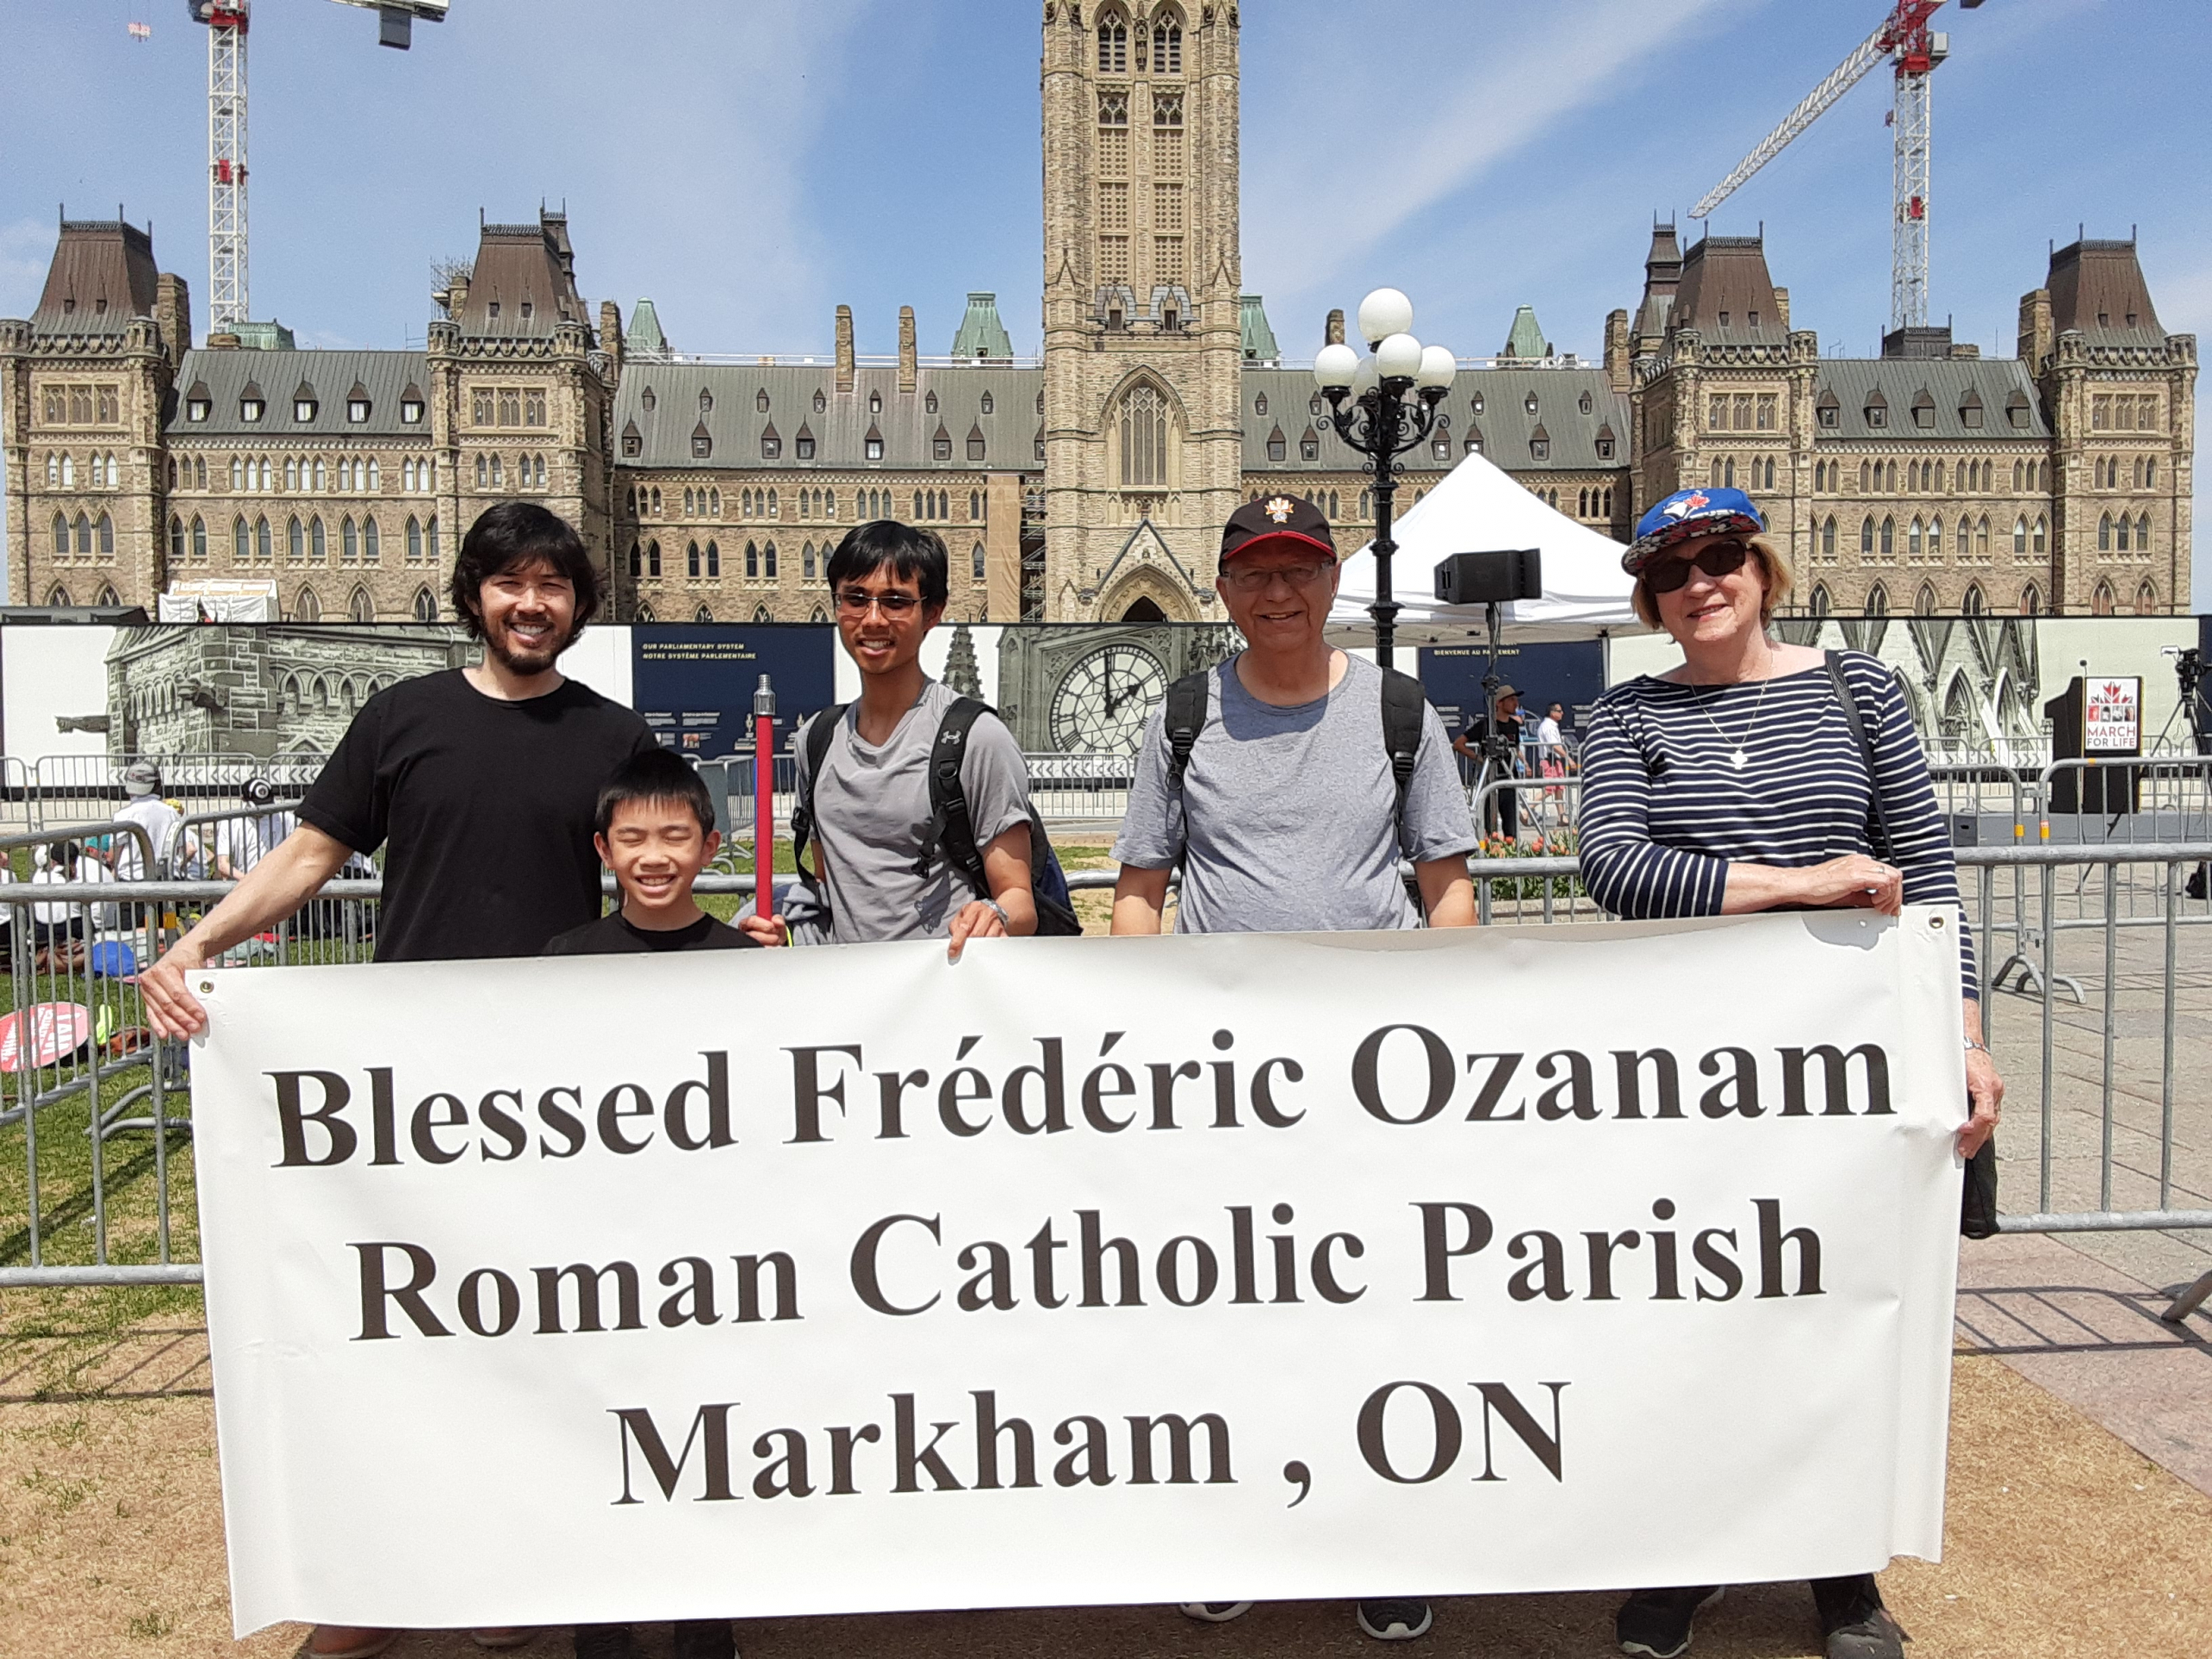 KofC Council 17065 - March for Life in Ottawa, May 12, 2022